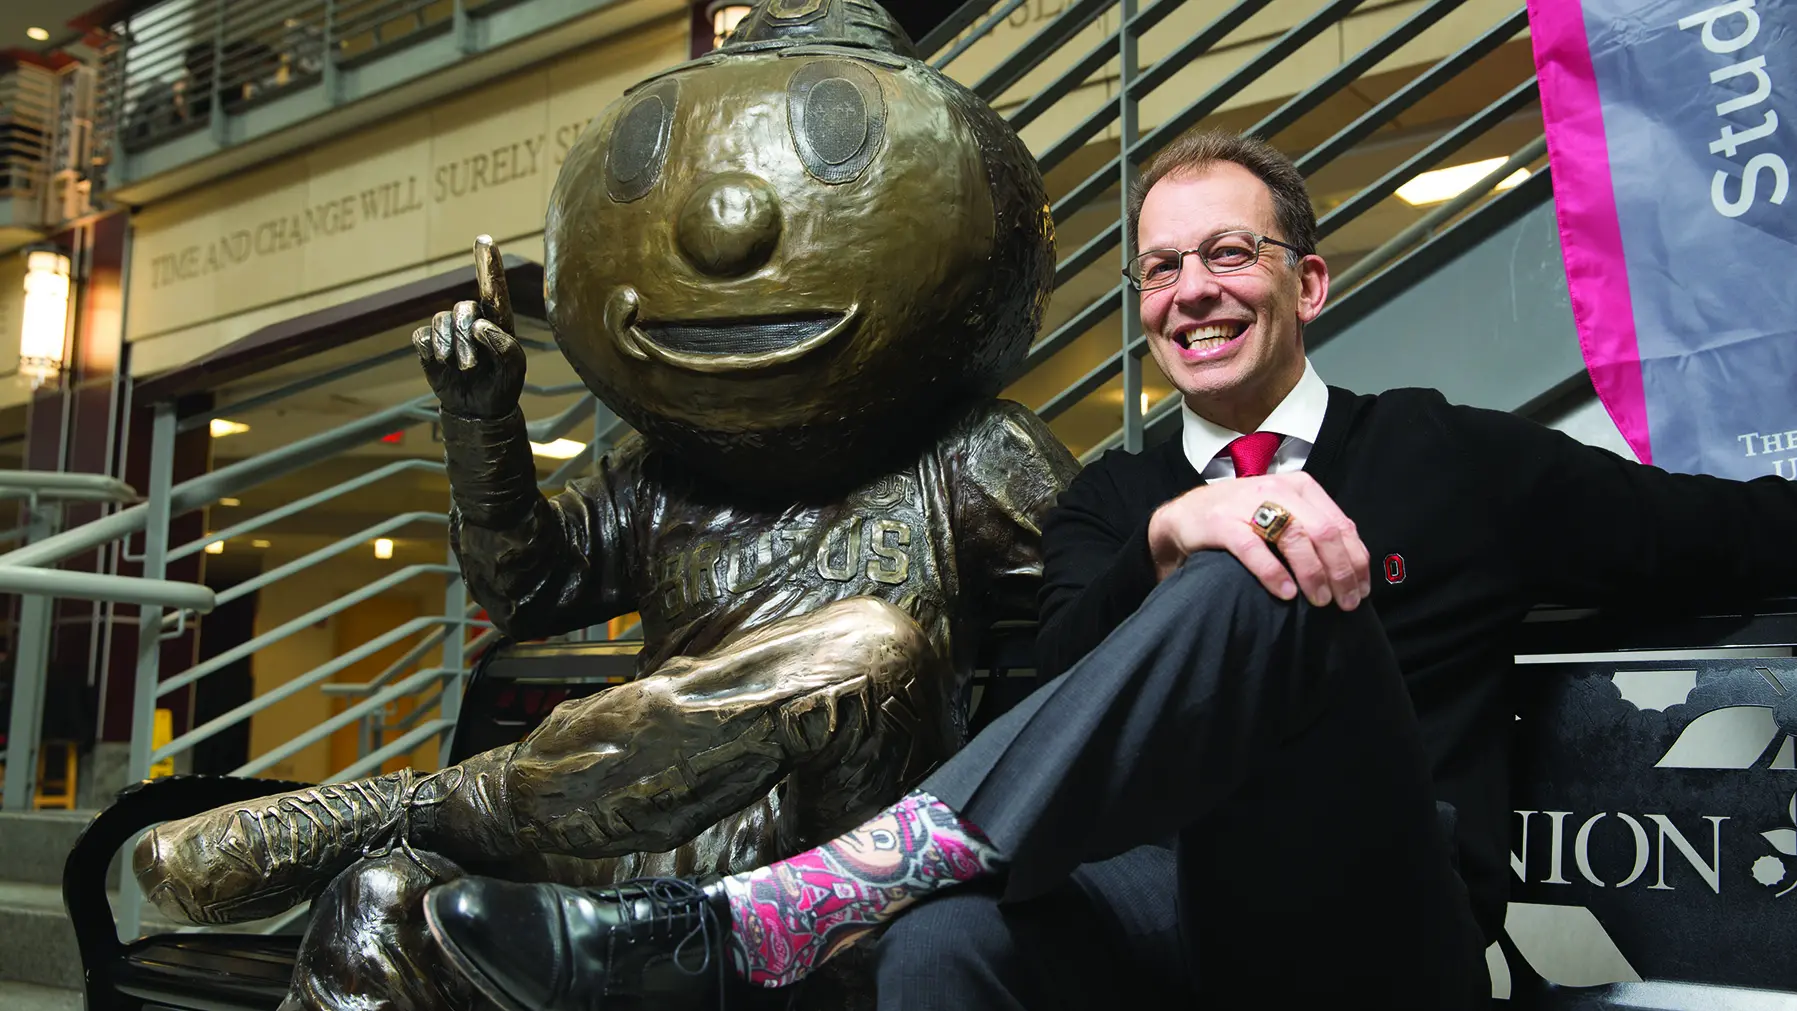 A man smiles as he sits on a bench next to a bronze statue of Brutus. Their leg-crossed poses and smiles are similar.